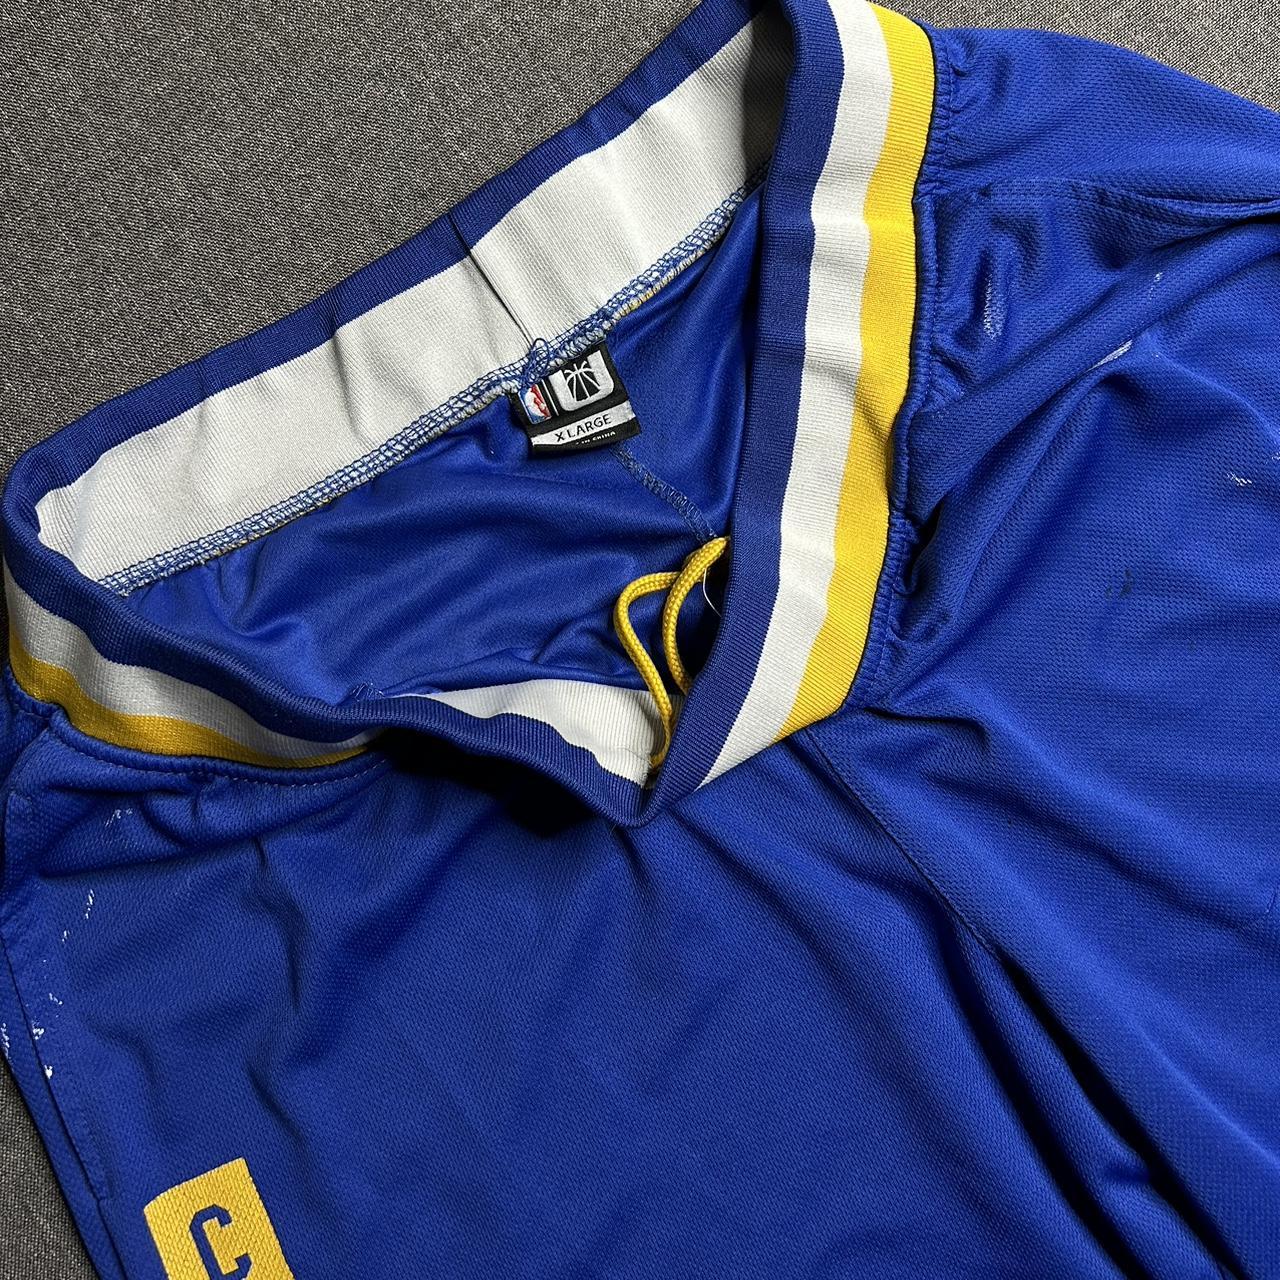 NBA Shorts | Steph Curry Basketball Shorts Nwt | Color: Blue/Yellow | Size: M | Pm-10084561's Closet